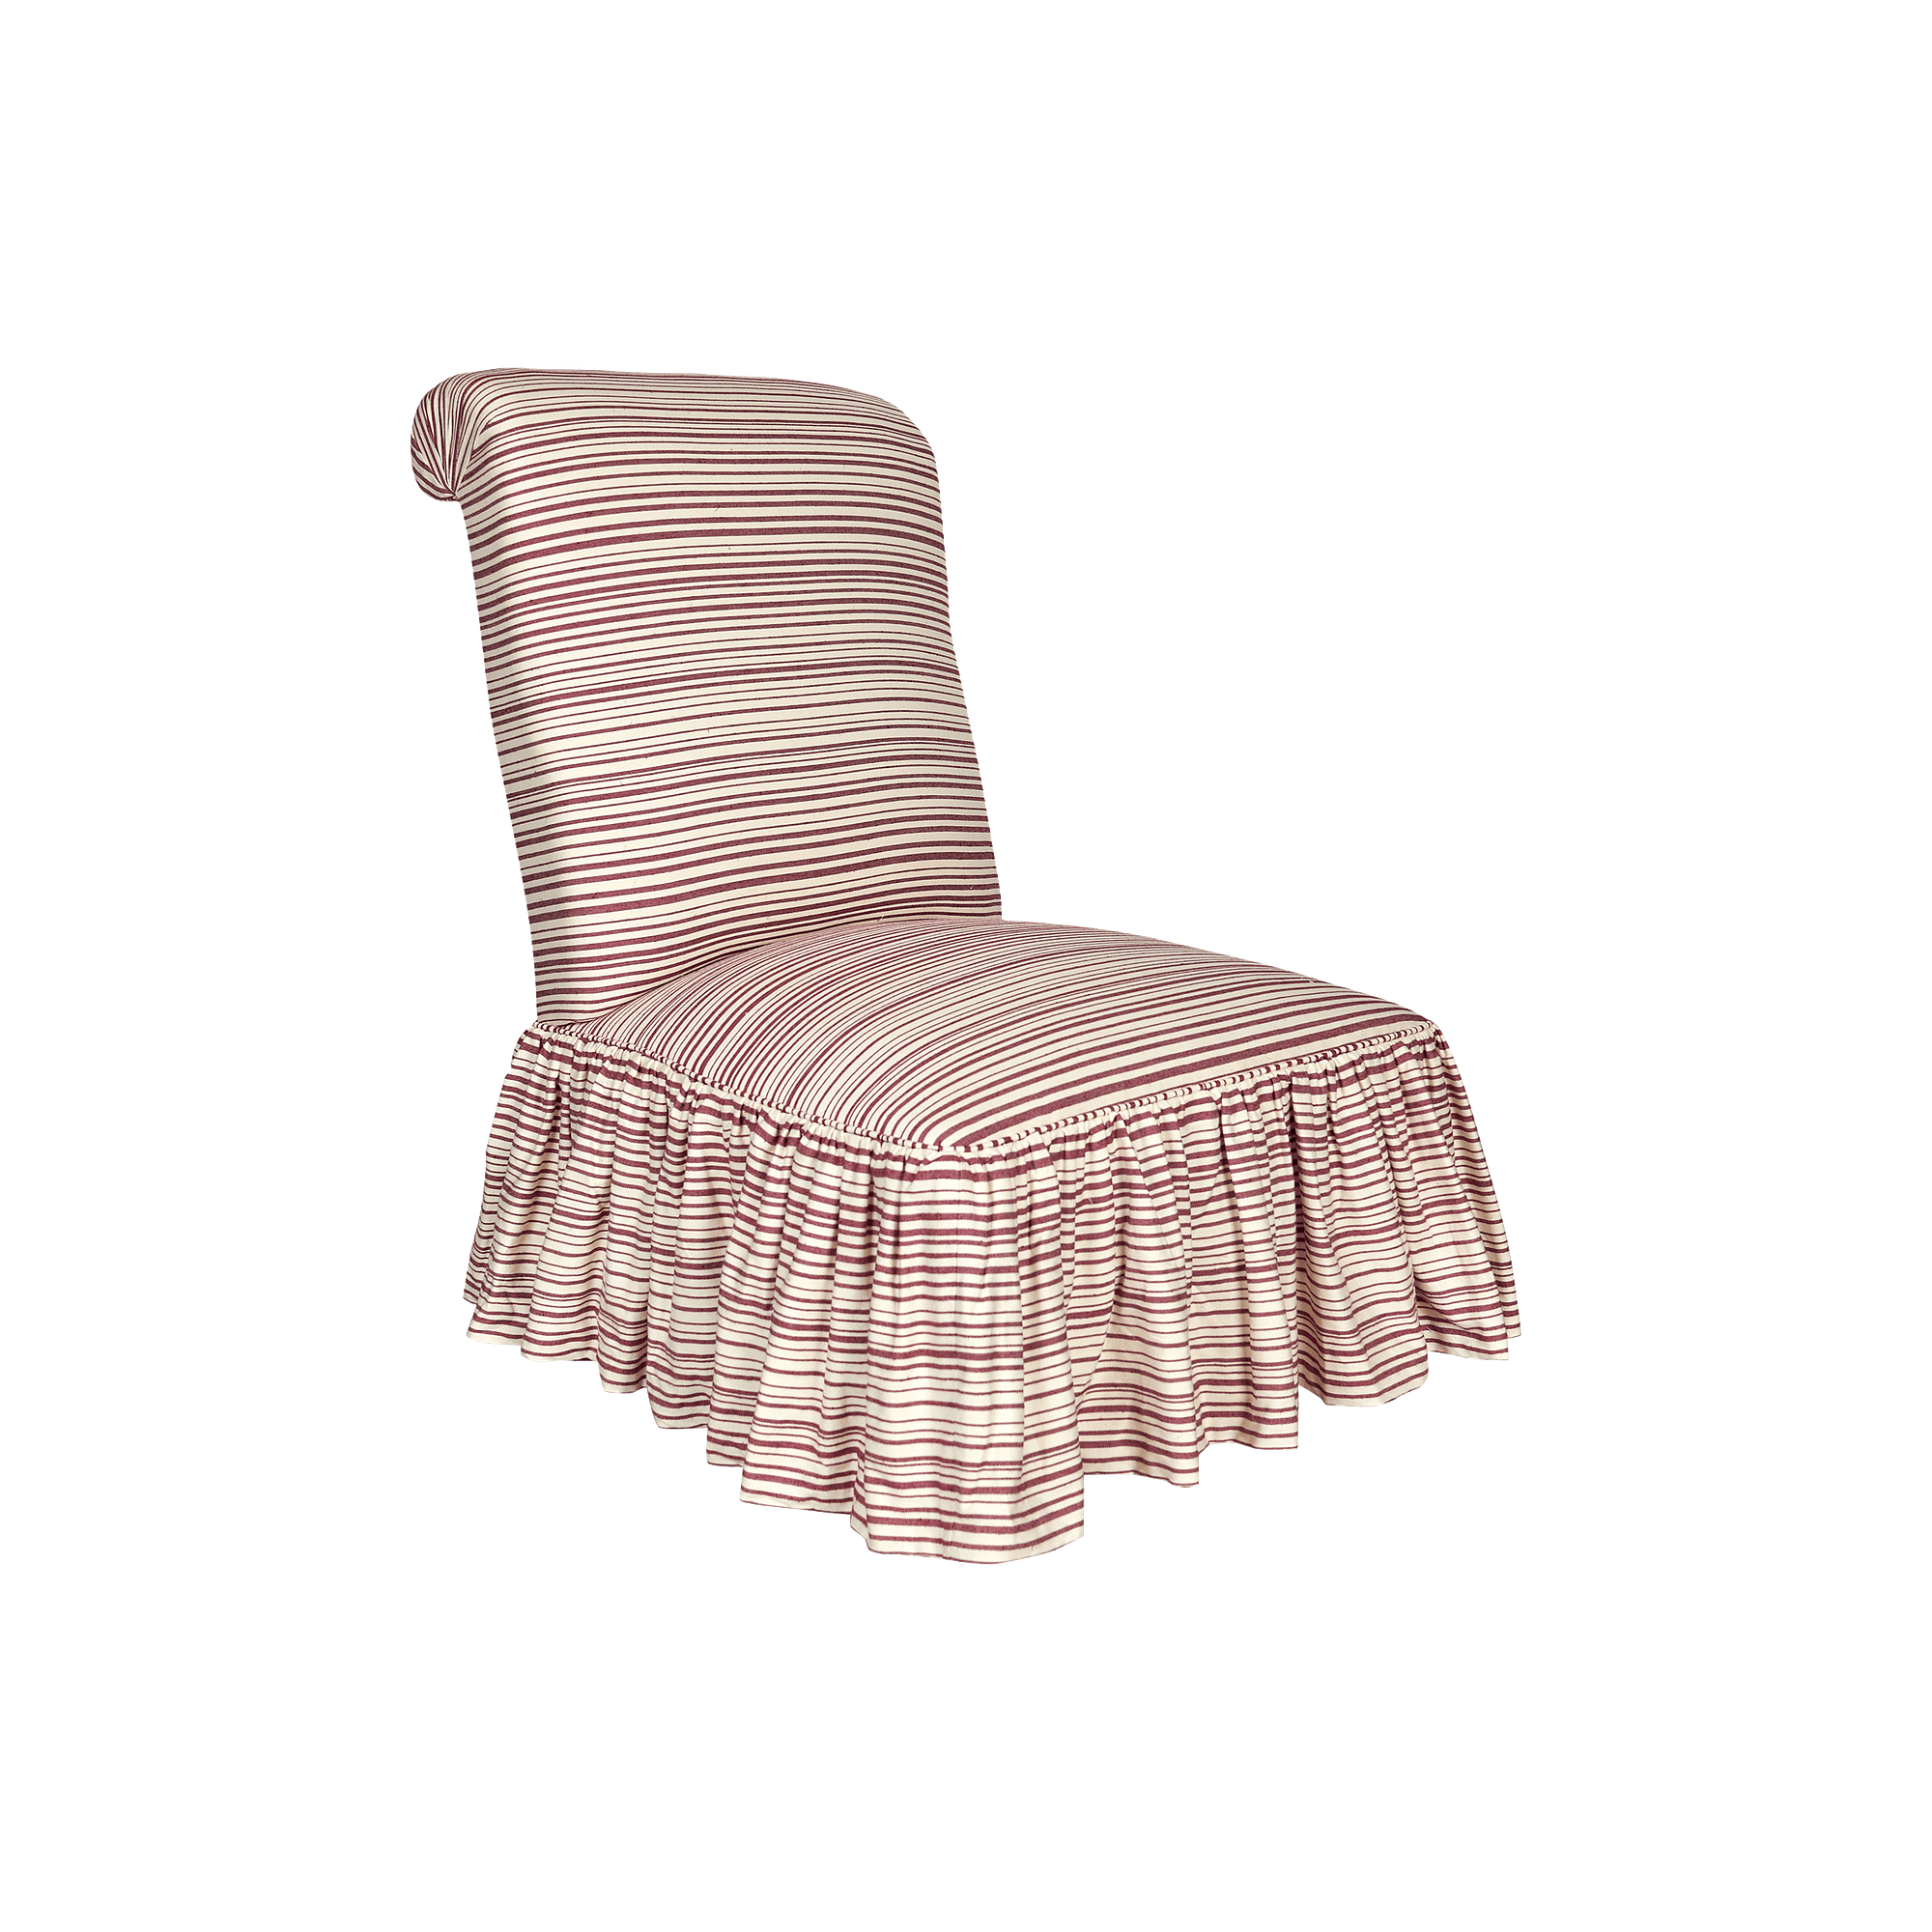 SSC-001 Scrollback armless slipper chair with gathered skirt in Horizon Stripe Pepper Red